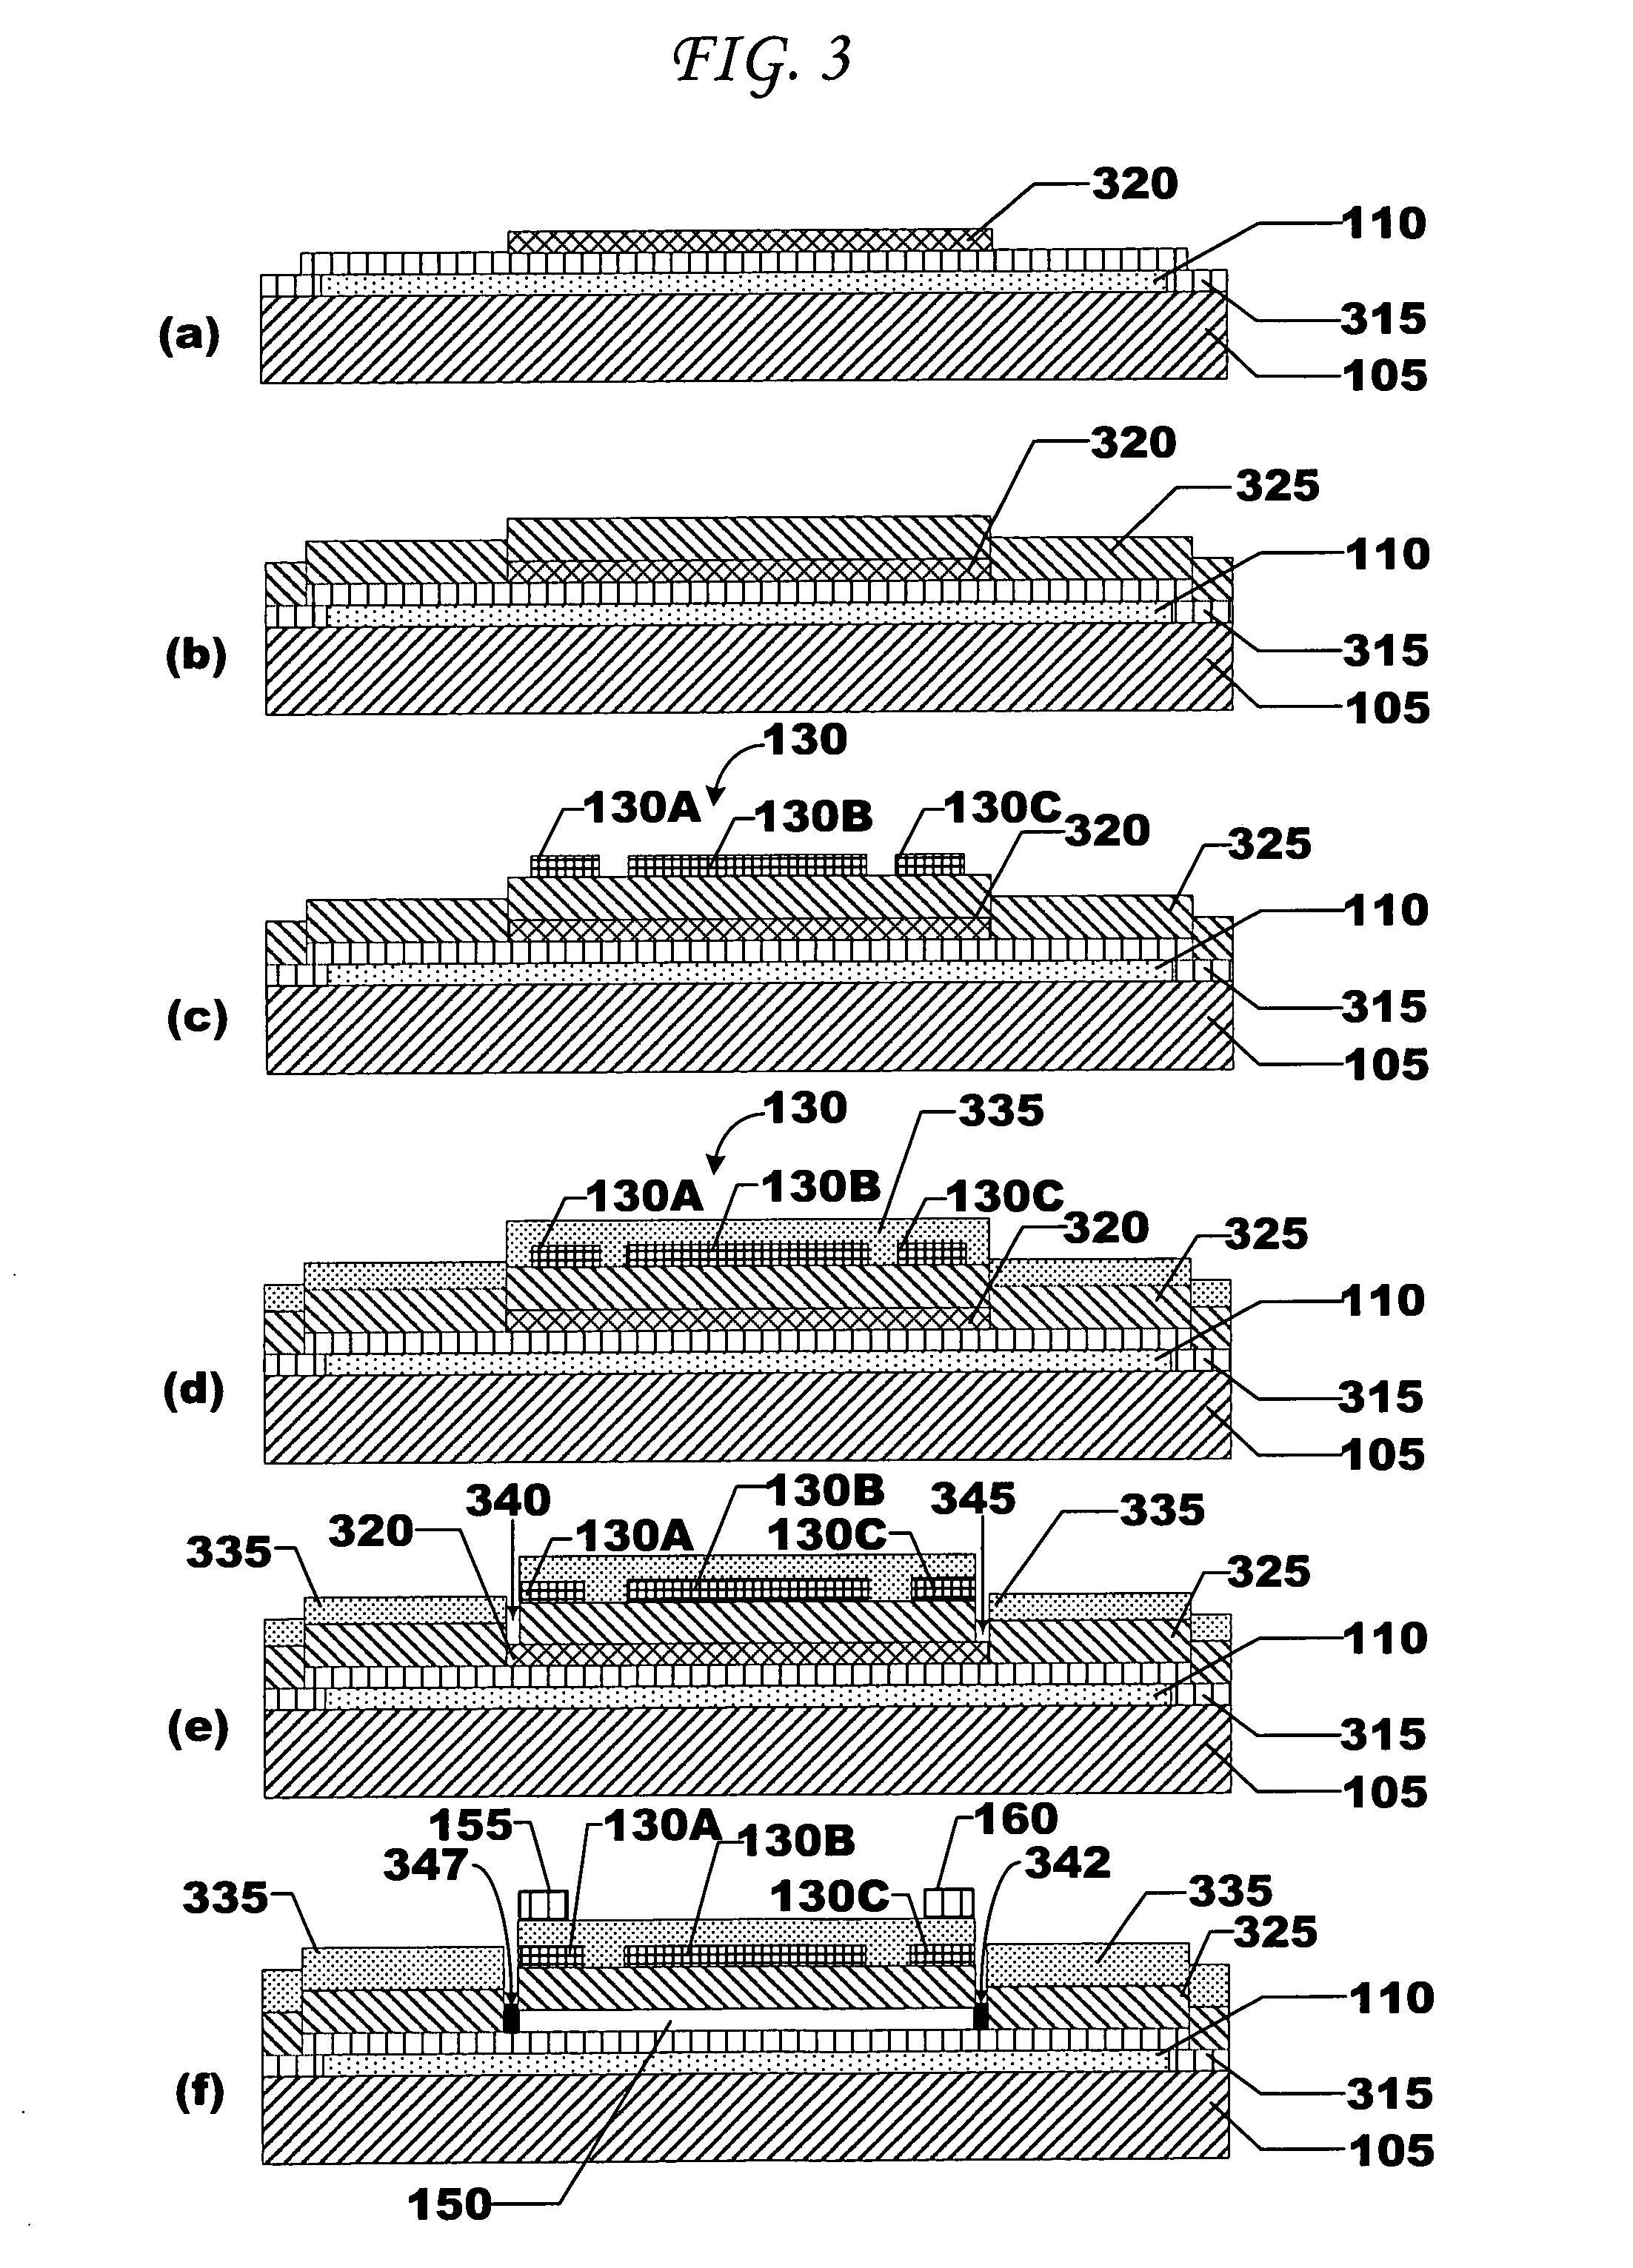 Asymmetric membrane cMUT devices and fabrication methods